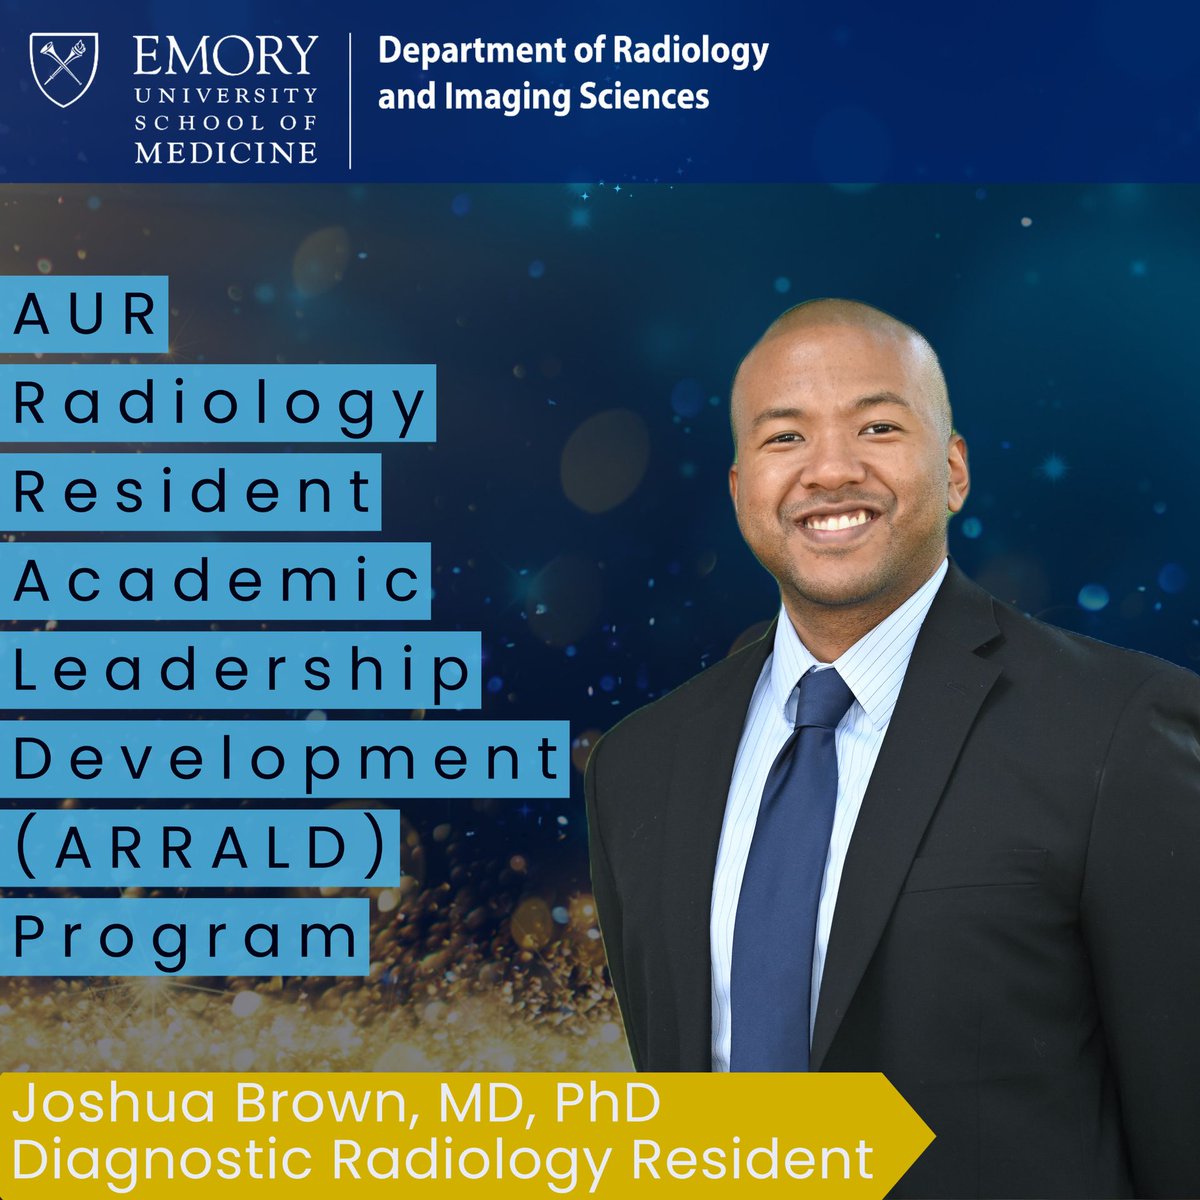 Congratulations @joshbrownmdphd! You and #ARRALD are made for each other and we are so proud of you! Also are blown away by all you've accomplished & it's only your 2nd year. @AURtweet @chrisho_md